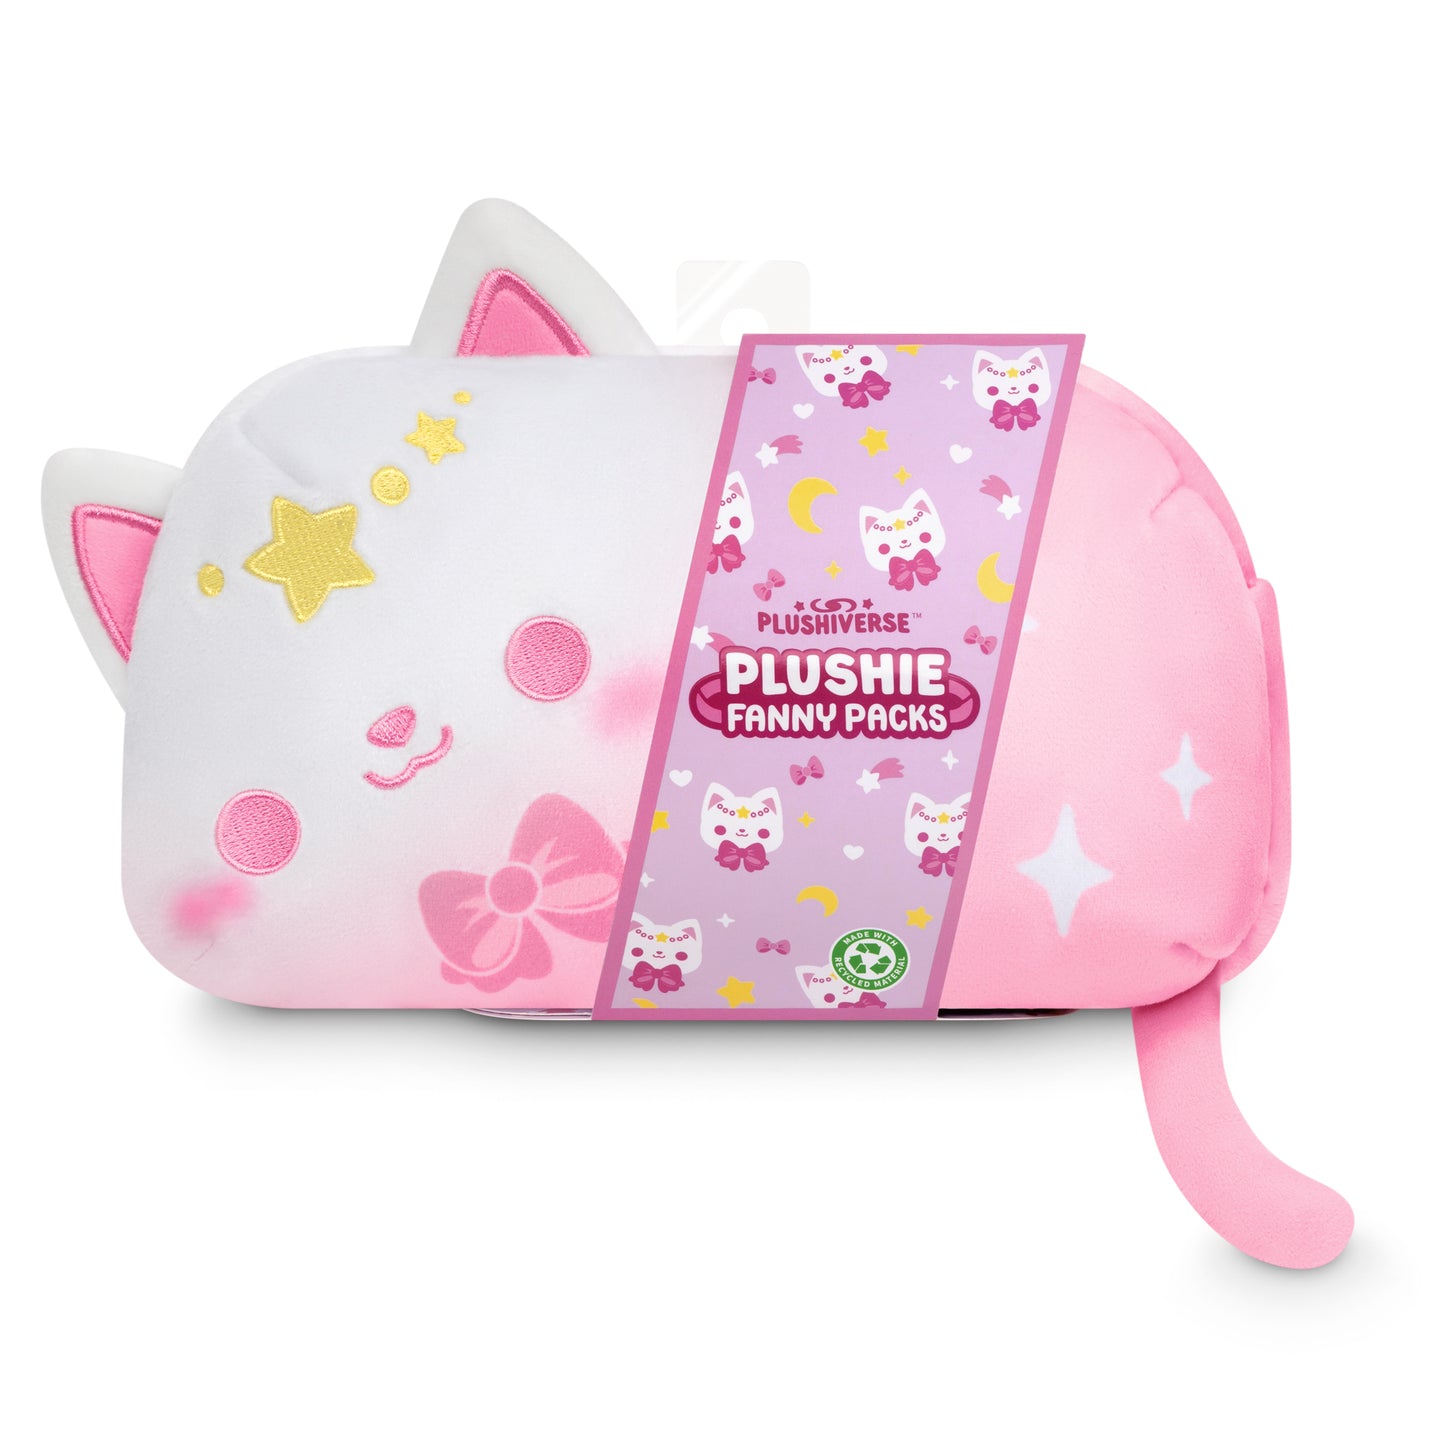 Child's Plushiverse Just Like Meowgic Plushie Fanny Pack from the TeeTurtle Kawaii Cuties collection, with packaging displaying product information and an adjustable belt.